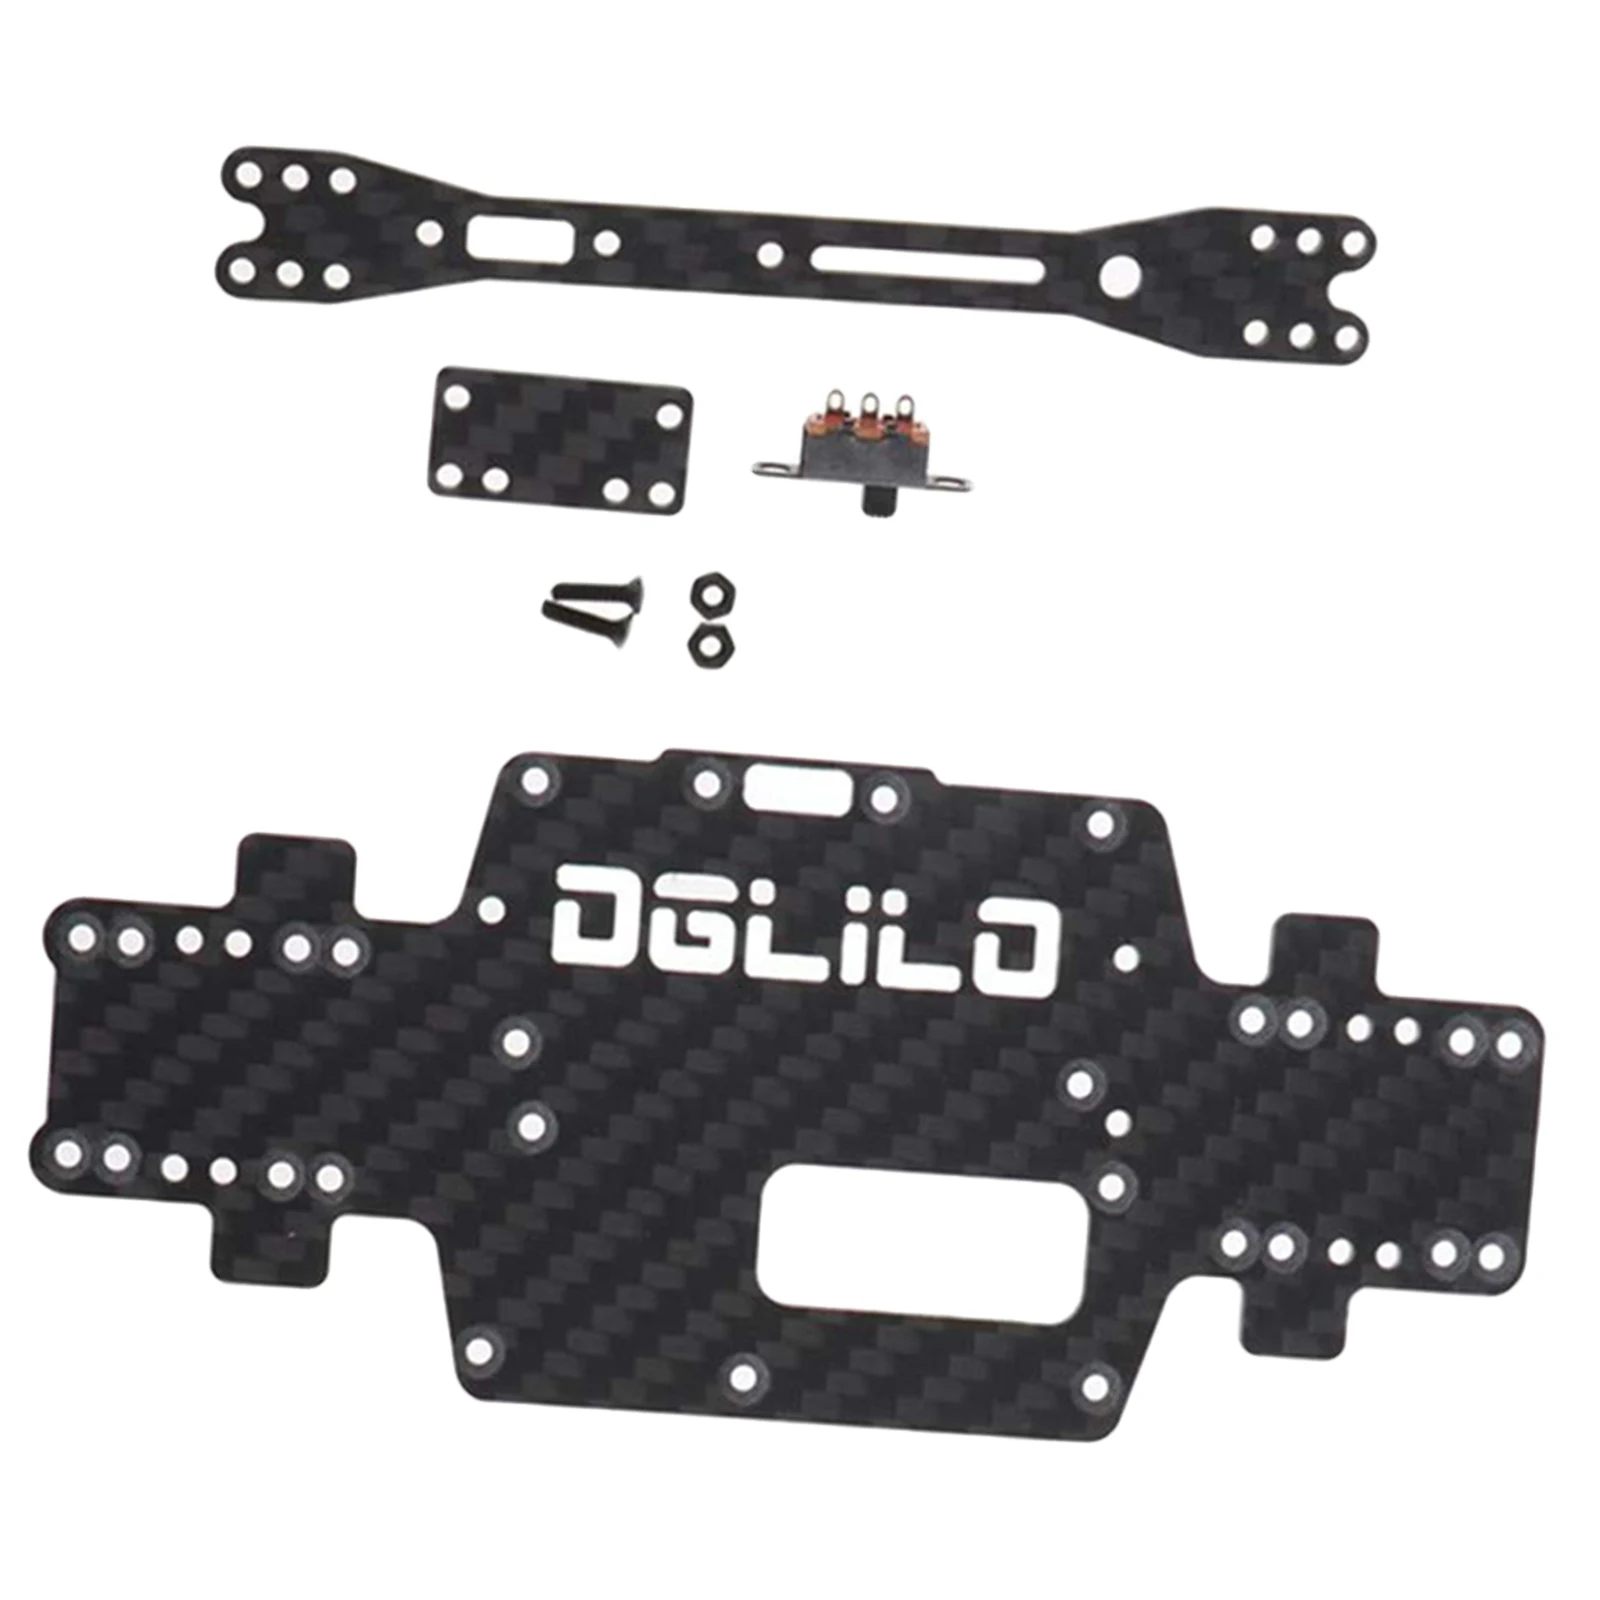 RC Chassis Body Plate for Wltoys K999 P939 1/28 RC Truck Electric Toy Replacement Parts Accessories